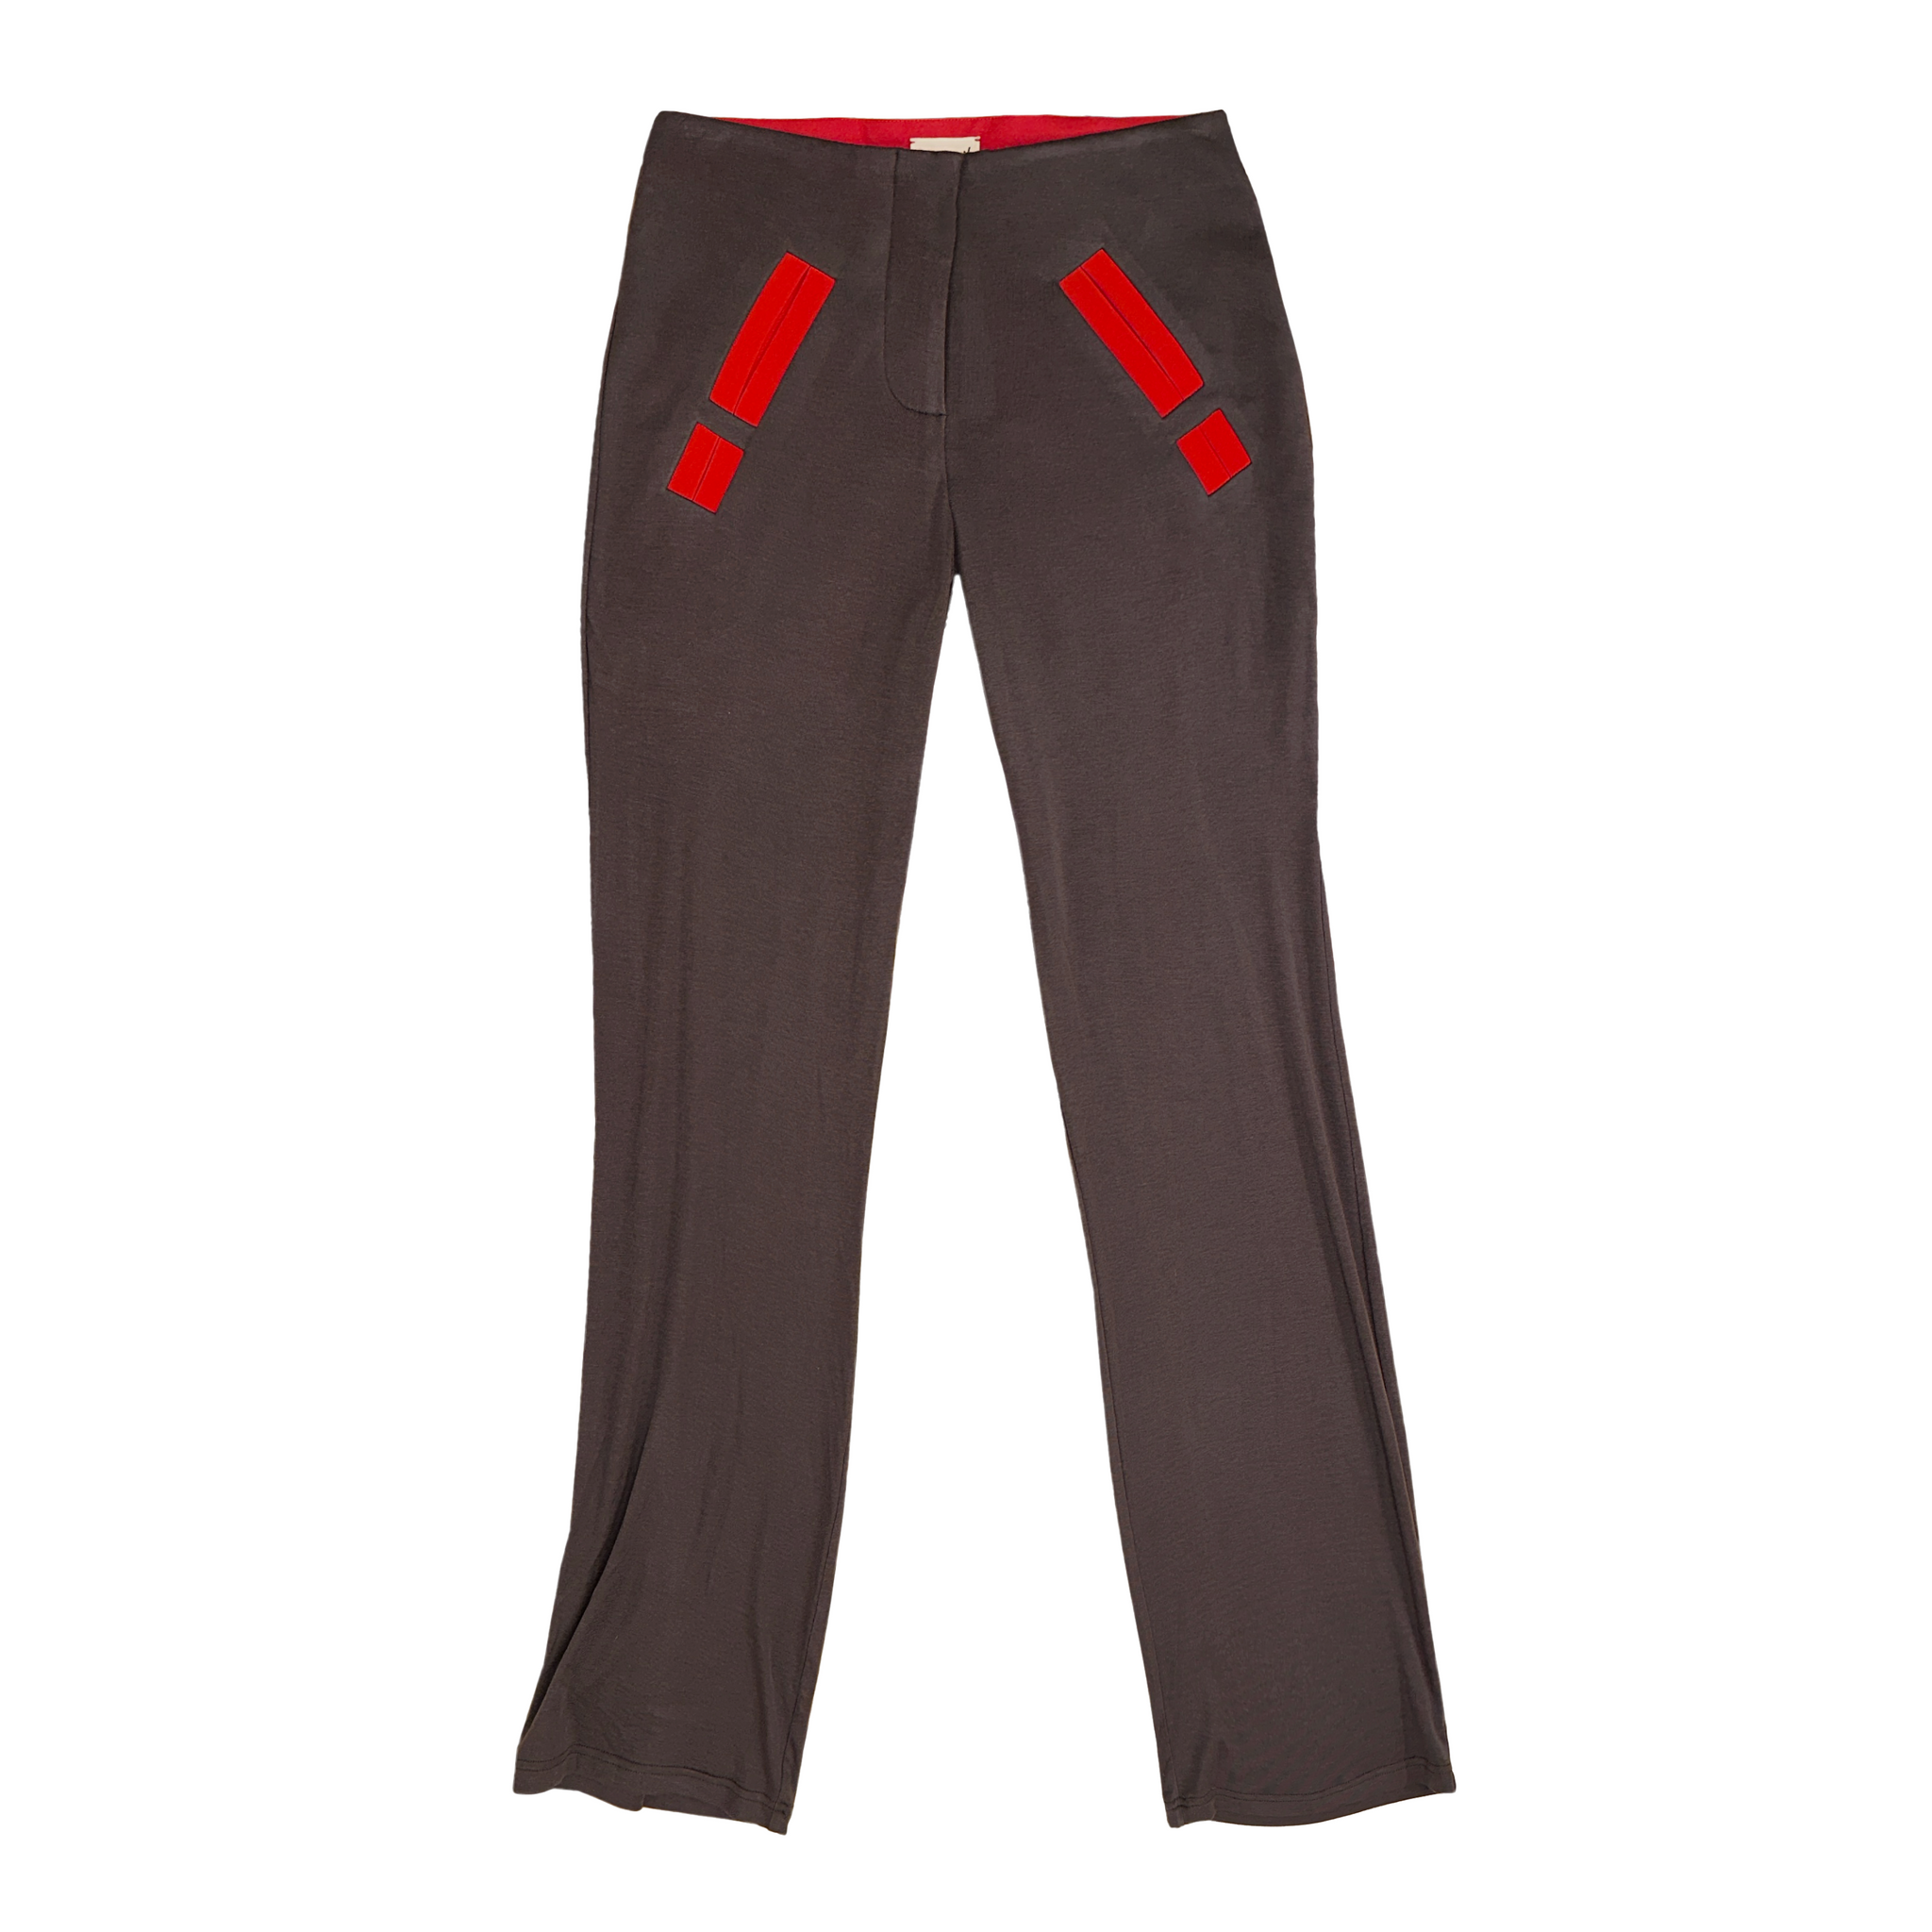 Exclamation Point Track Pants